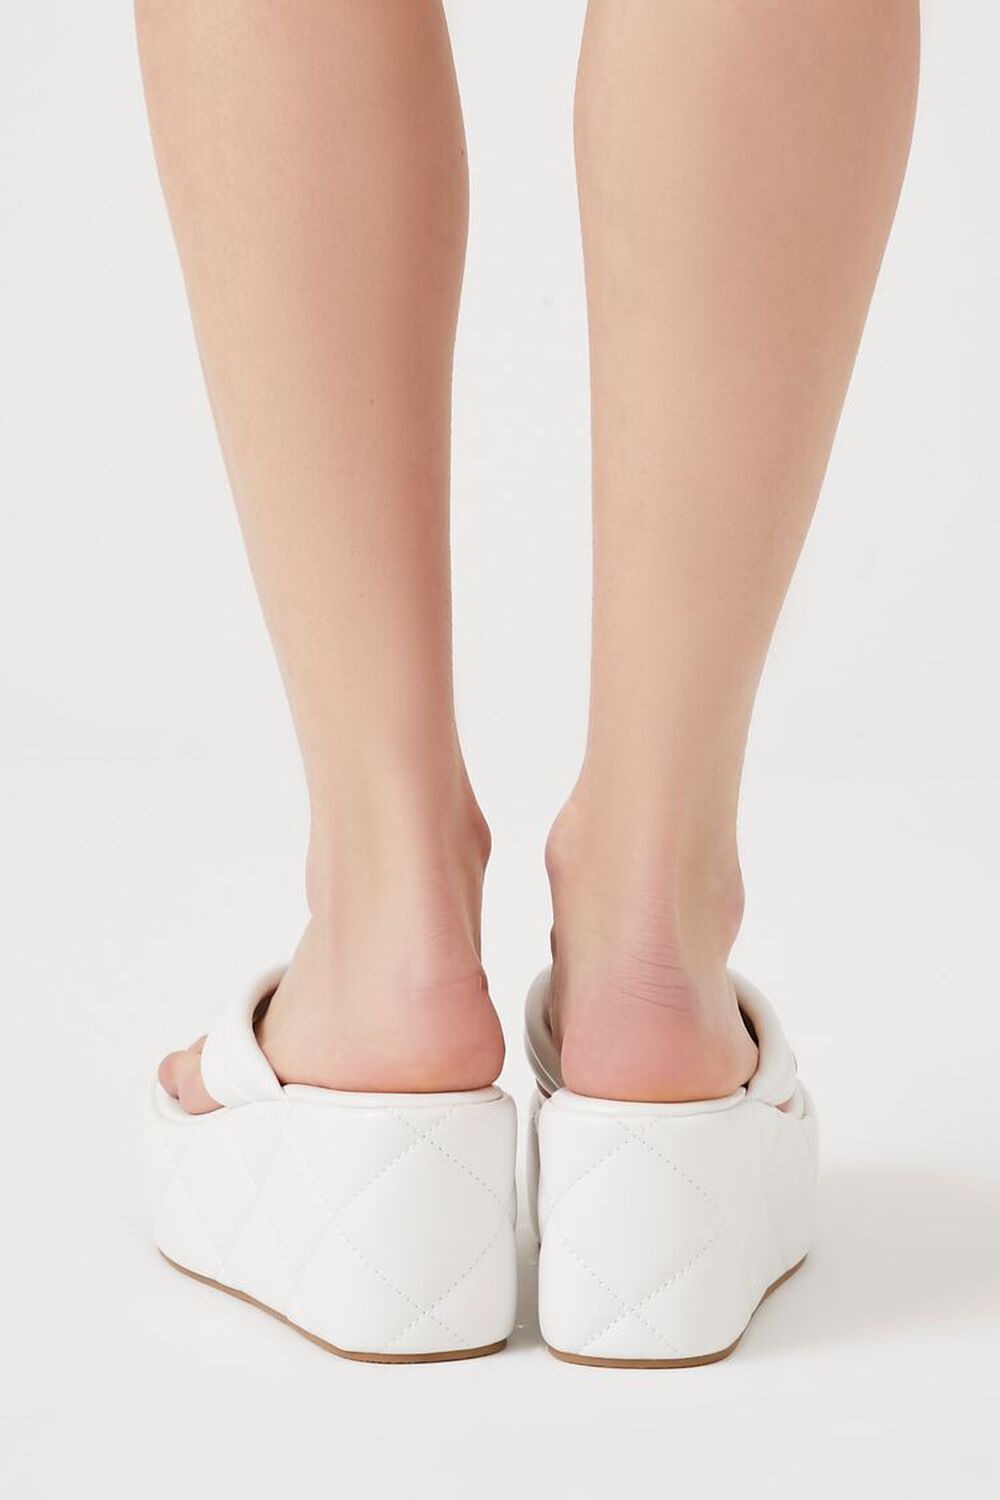 WHITE Faux Leather Quilted Wedges, image 2